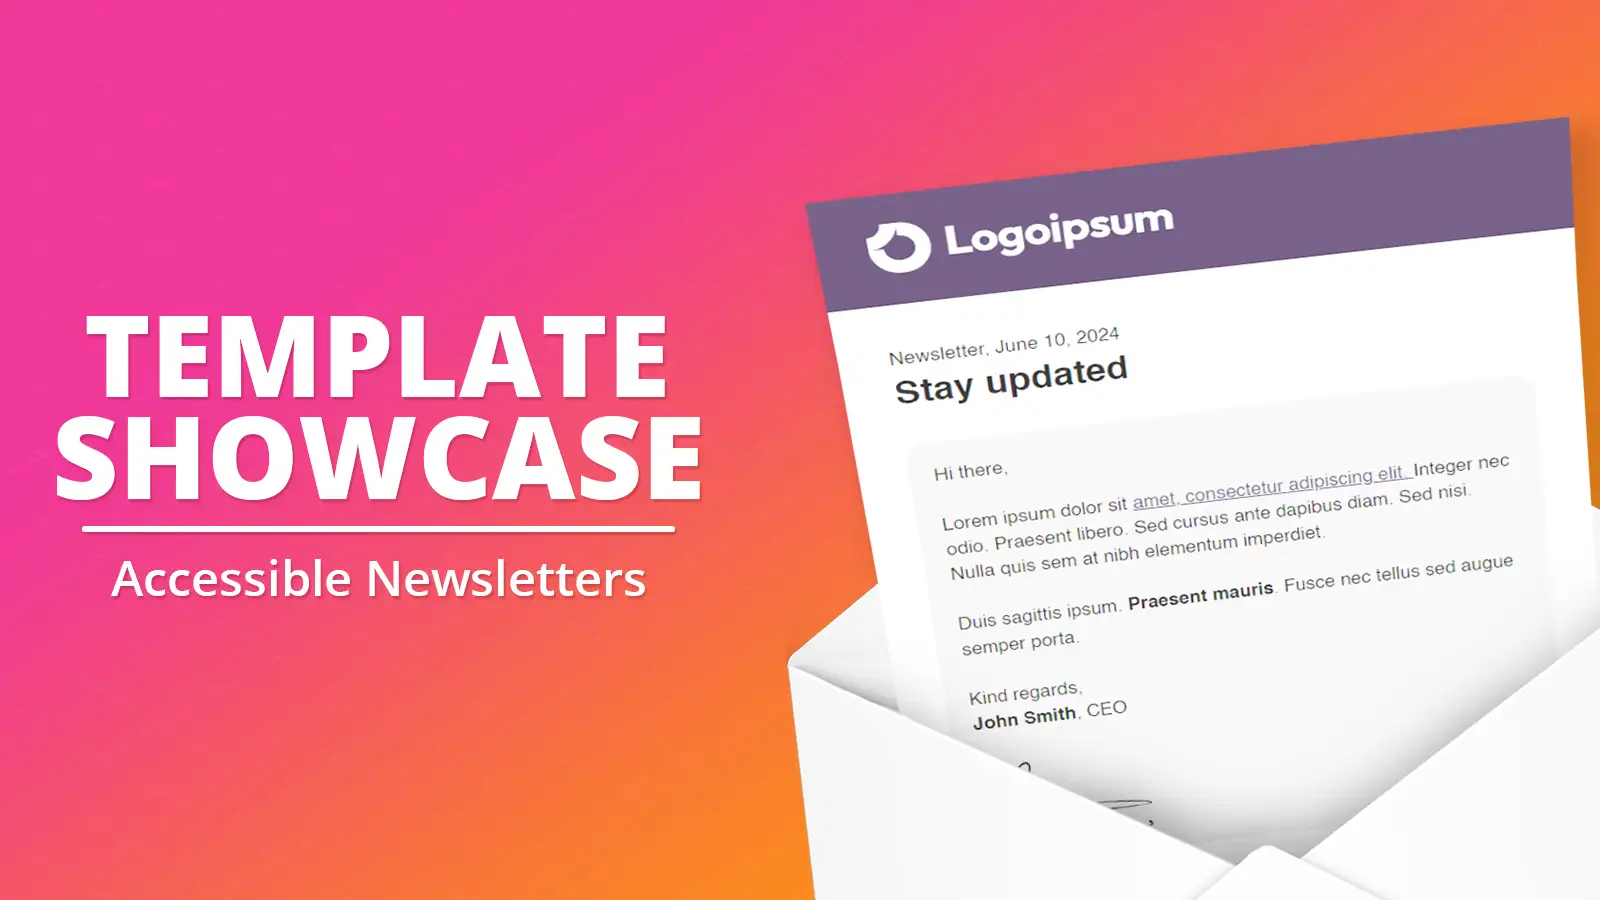 Template Showcase: Accessible Newsletters